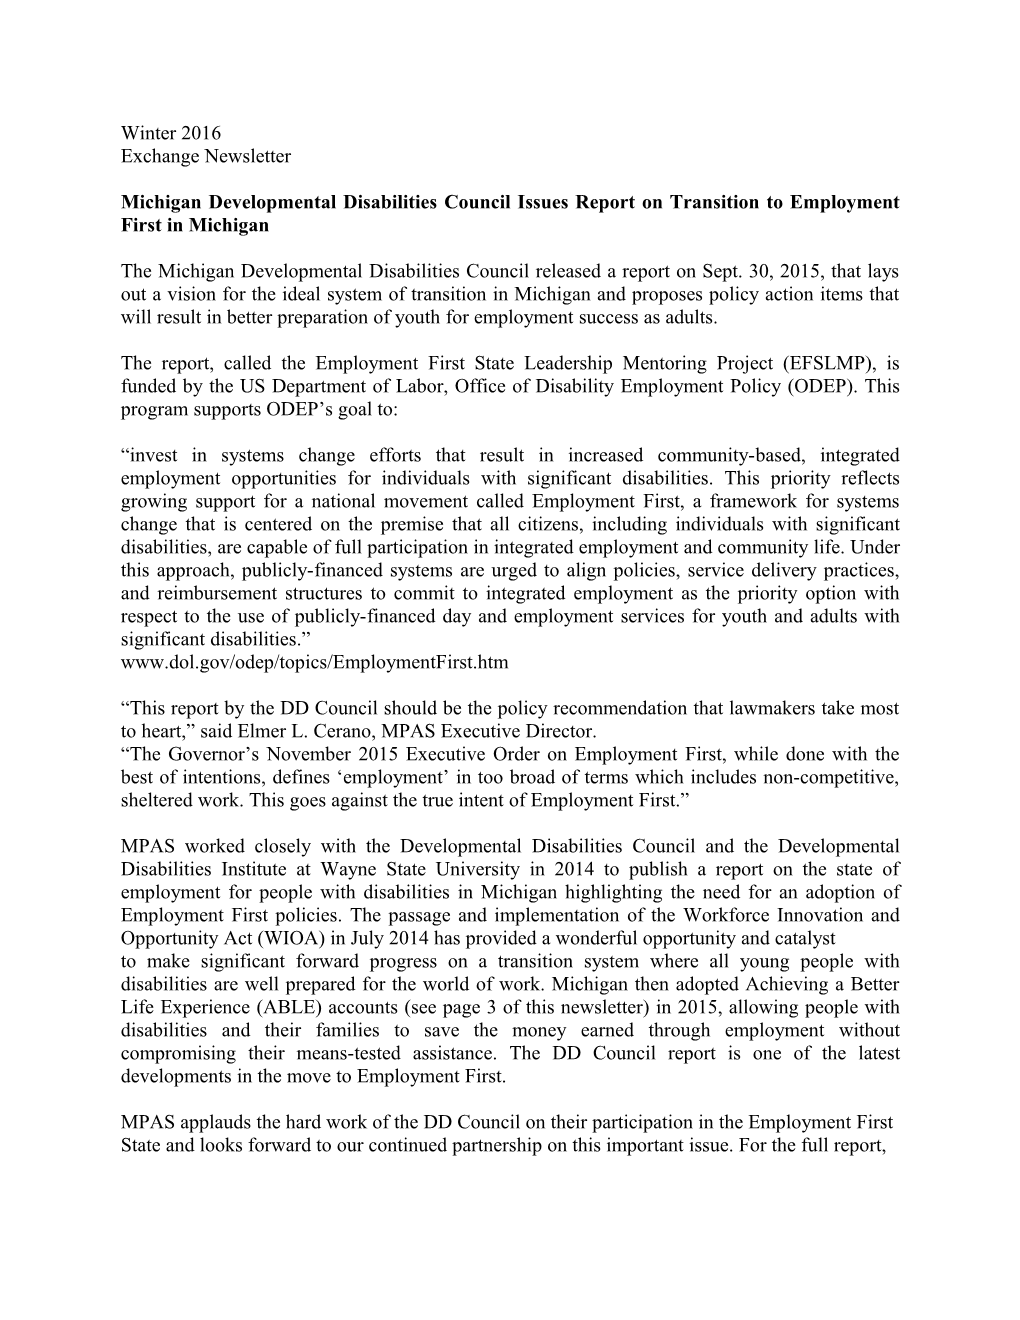 Michigan Developmental Disabilities Councilissues Report on Transition to Employment First